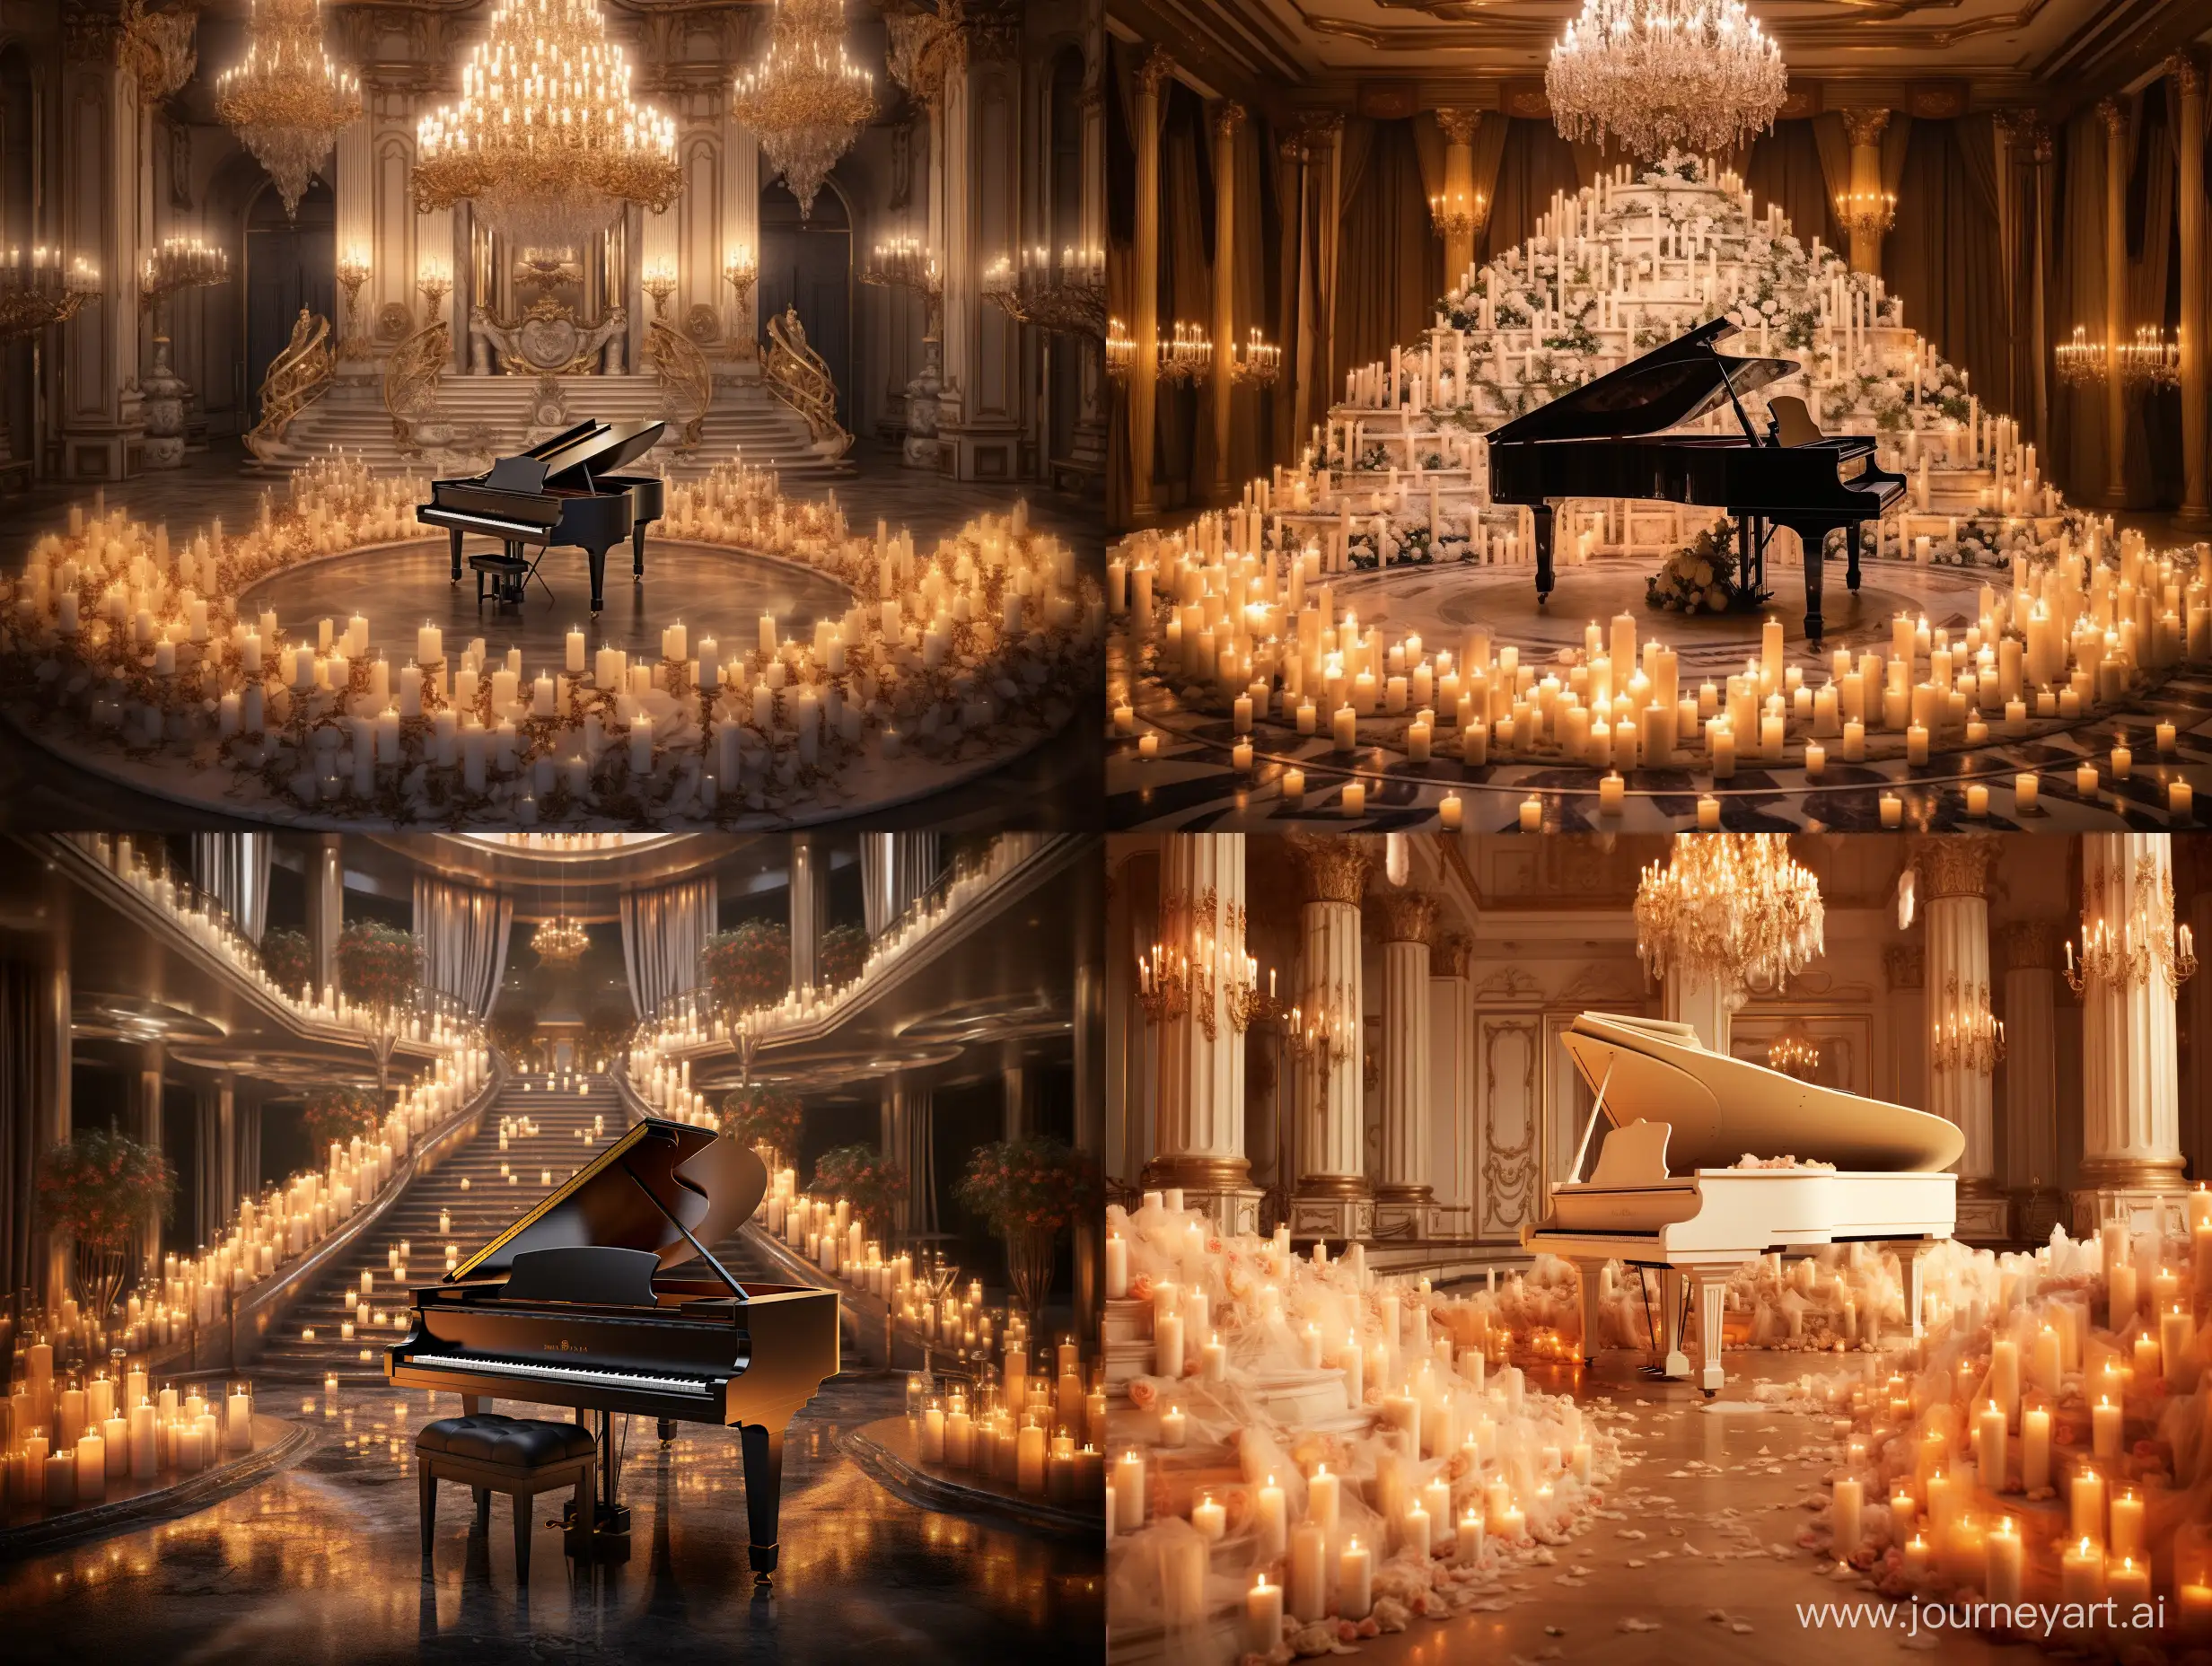 Elegant-Grand-Piano-Illuminated-by-a-Thousand-Candles-in-a-Beautiful-Hall